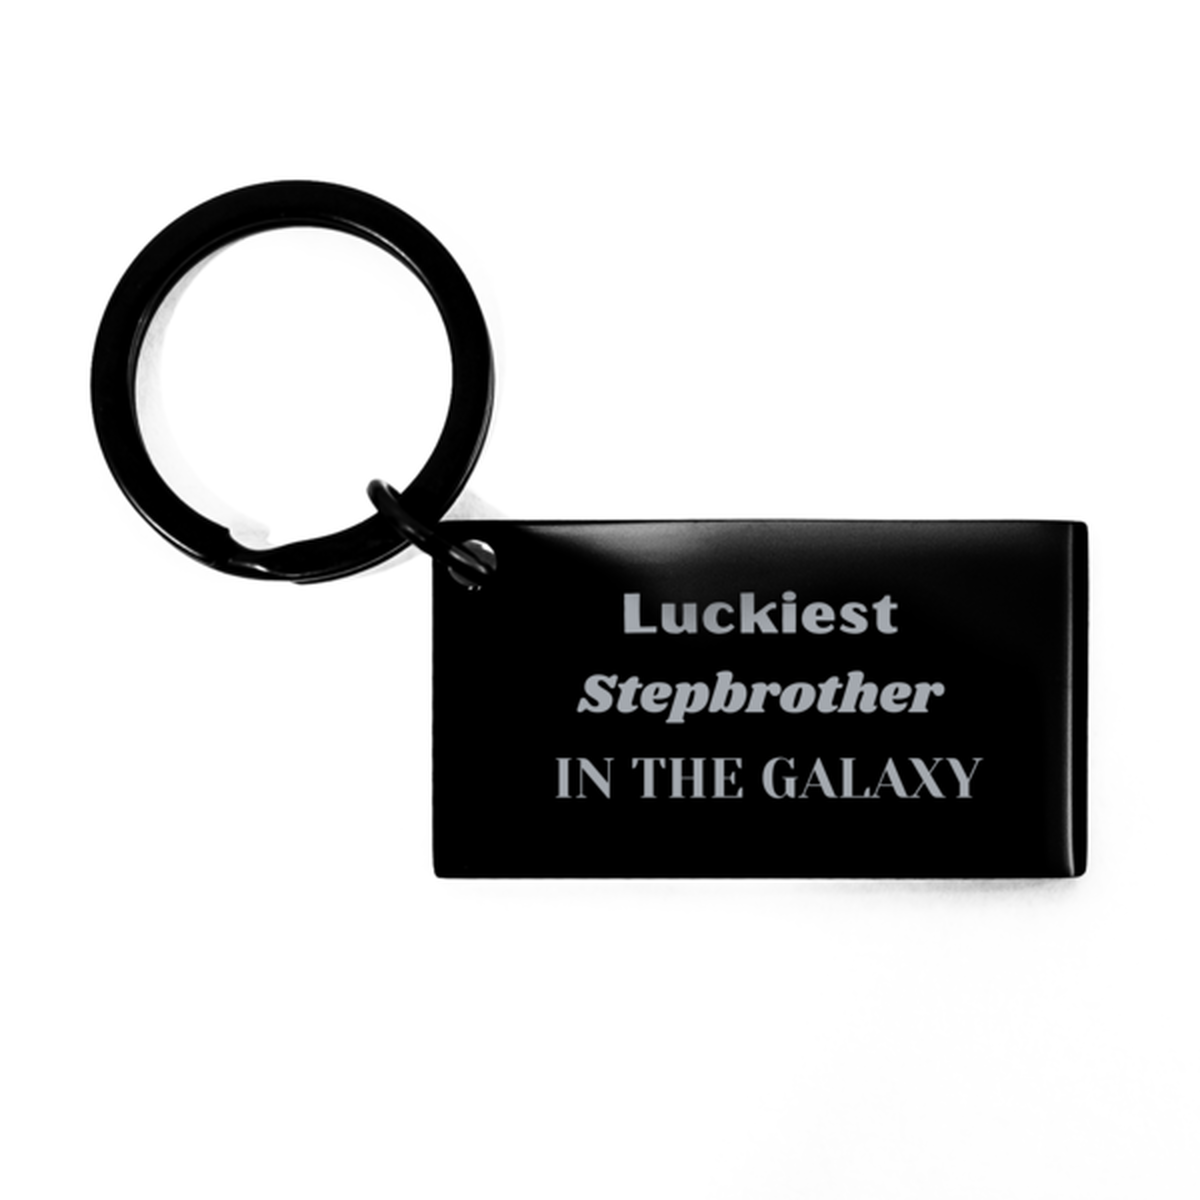 Luckiest Stepbrother in the Galaxy, To My Stepbrother Engraved Gifts, Christmas Stepbrother Keychain Gifts, X-mas Birthday Unique Gifts For Stepbrother Men Women